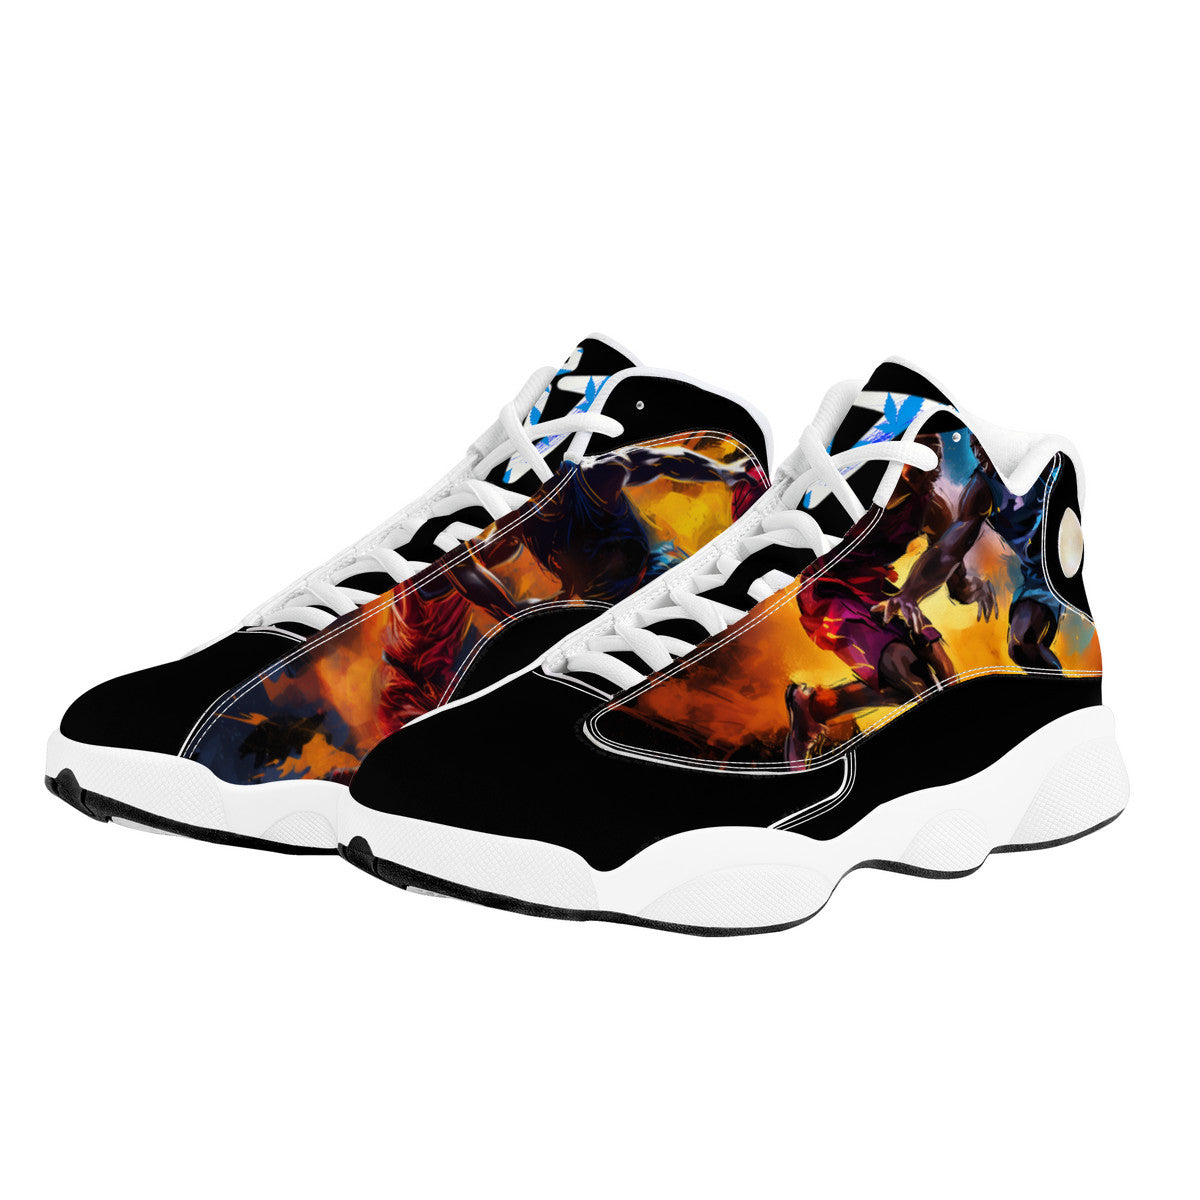 RVT Basketball Shoes - In the Game color/black